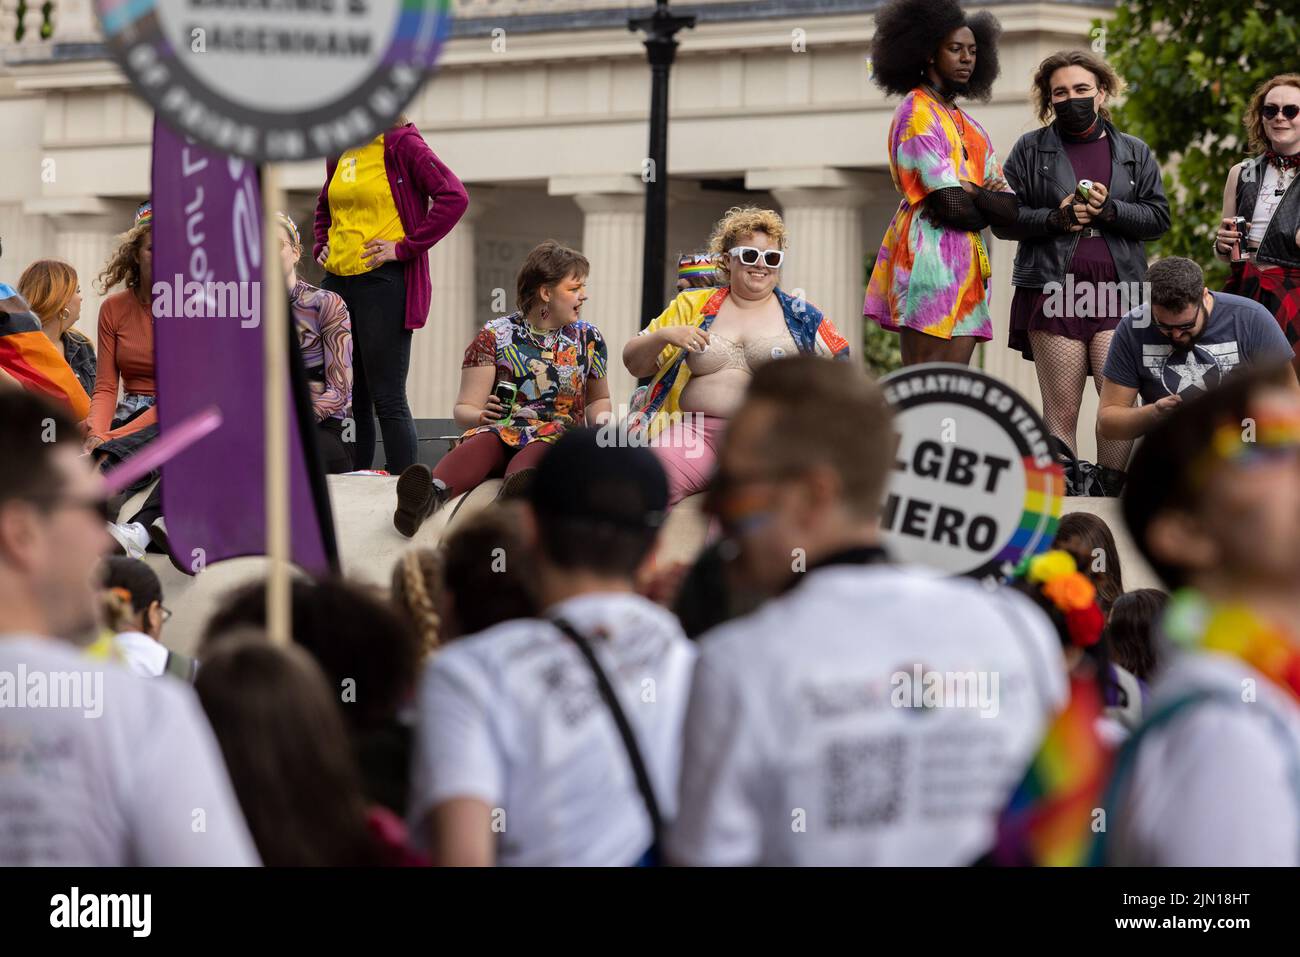 Pride London 2022: the annual march is a celebration for the lesbian, gay, bi-sexual, trans community.  This photo shows people lining the streets wat Stock Photo